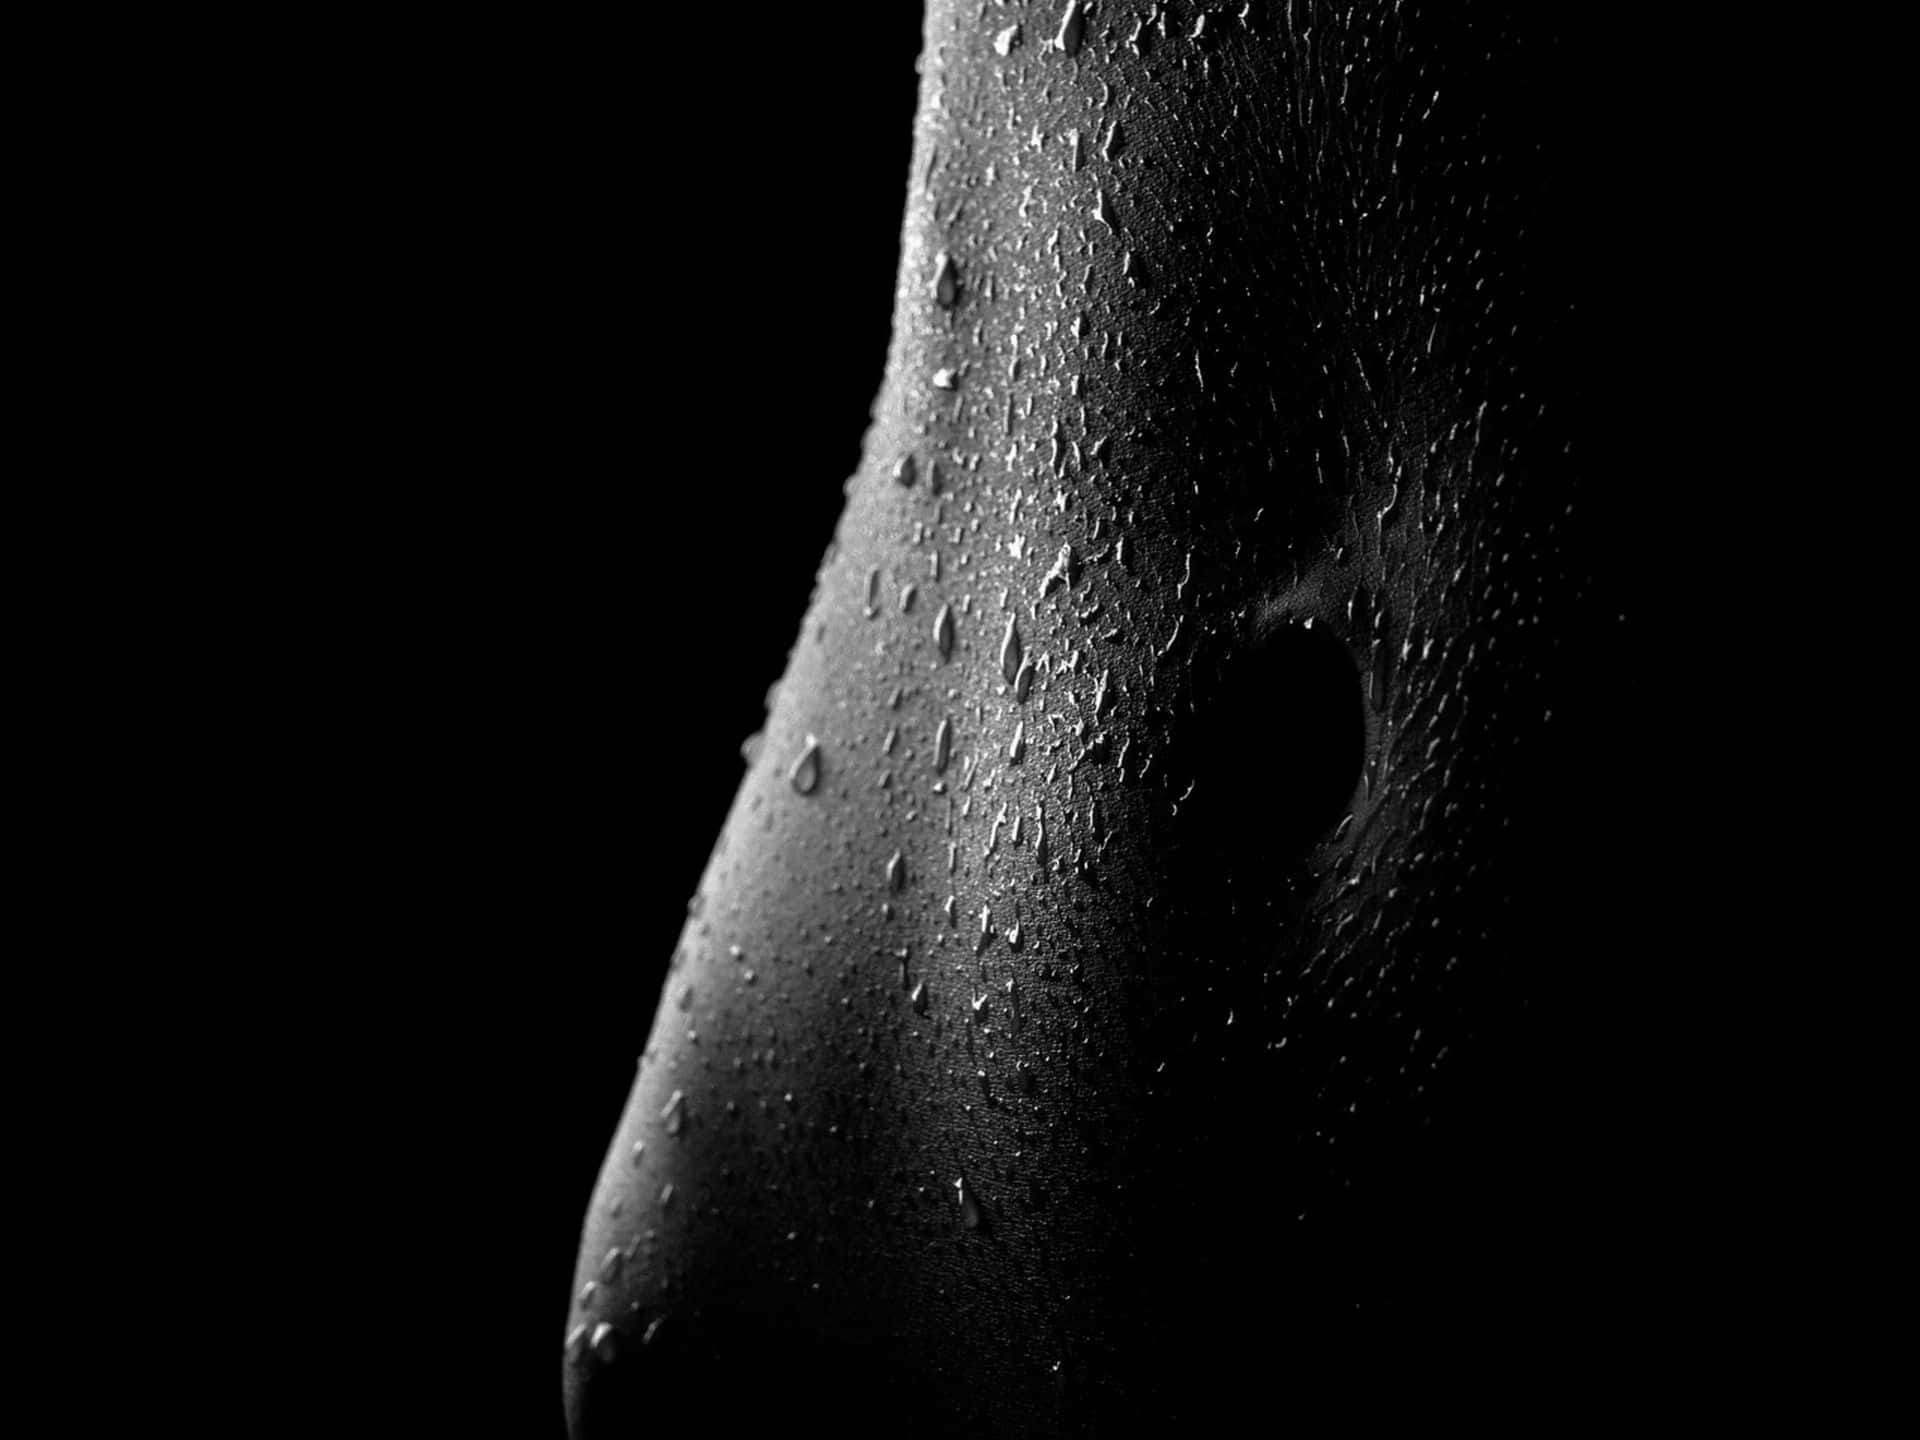 Female Body With Water Droplets Background